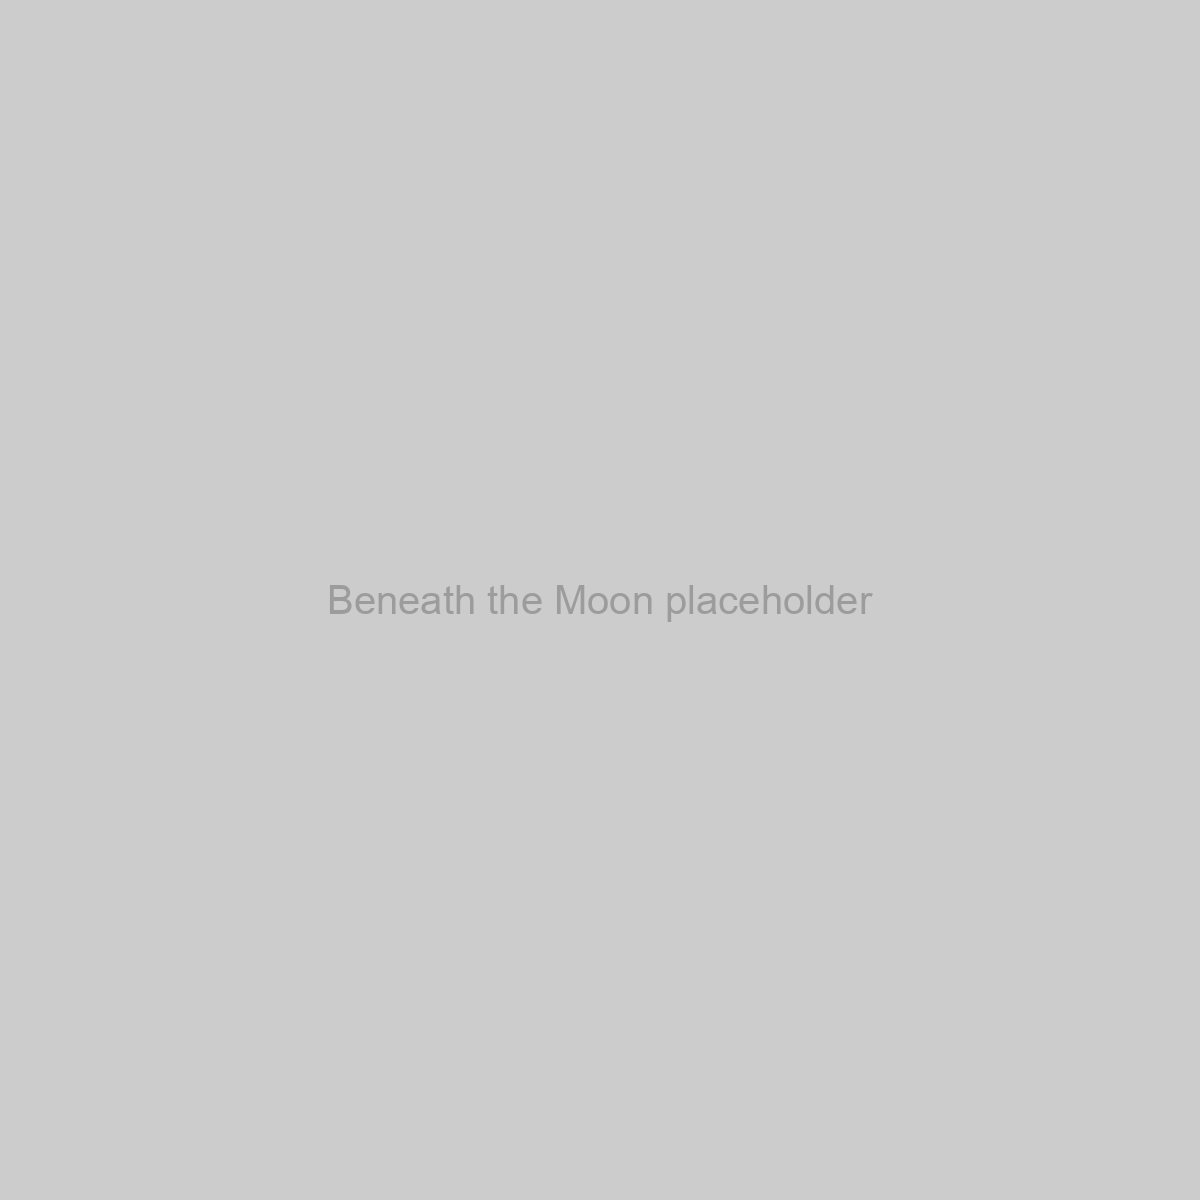 Beneath the Moon Placeholder Image